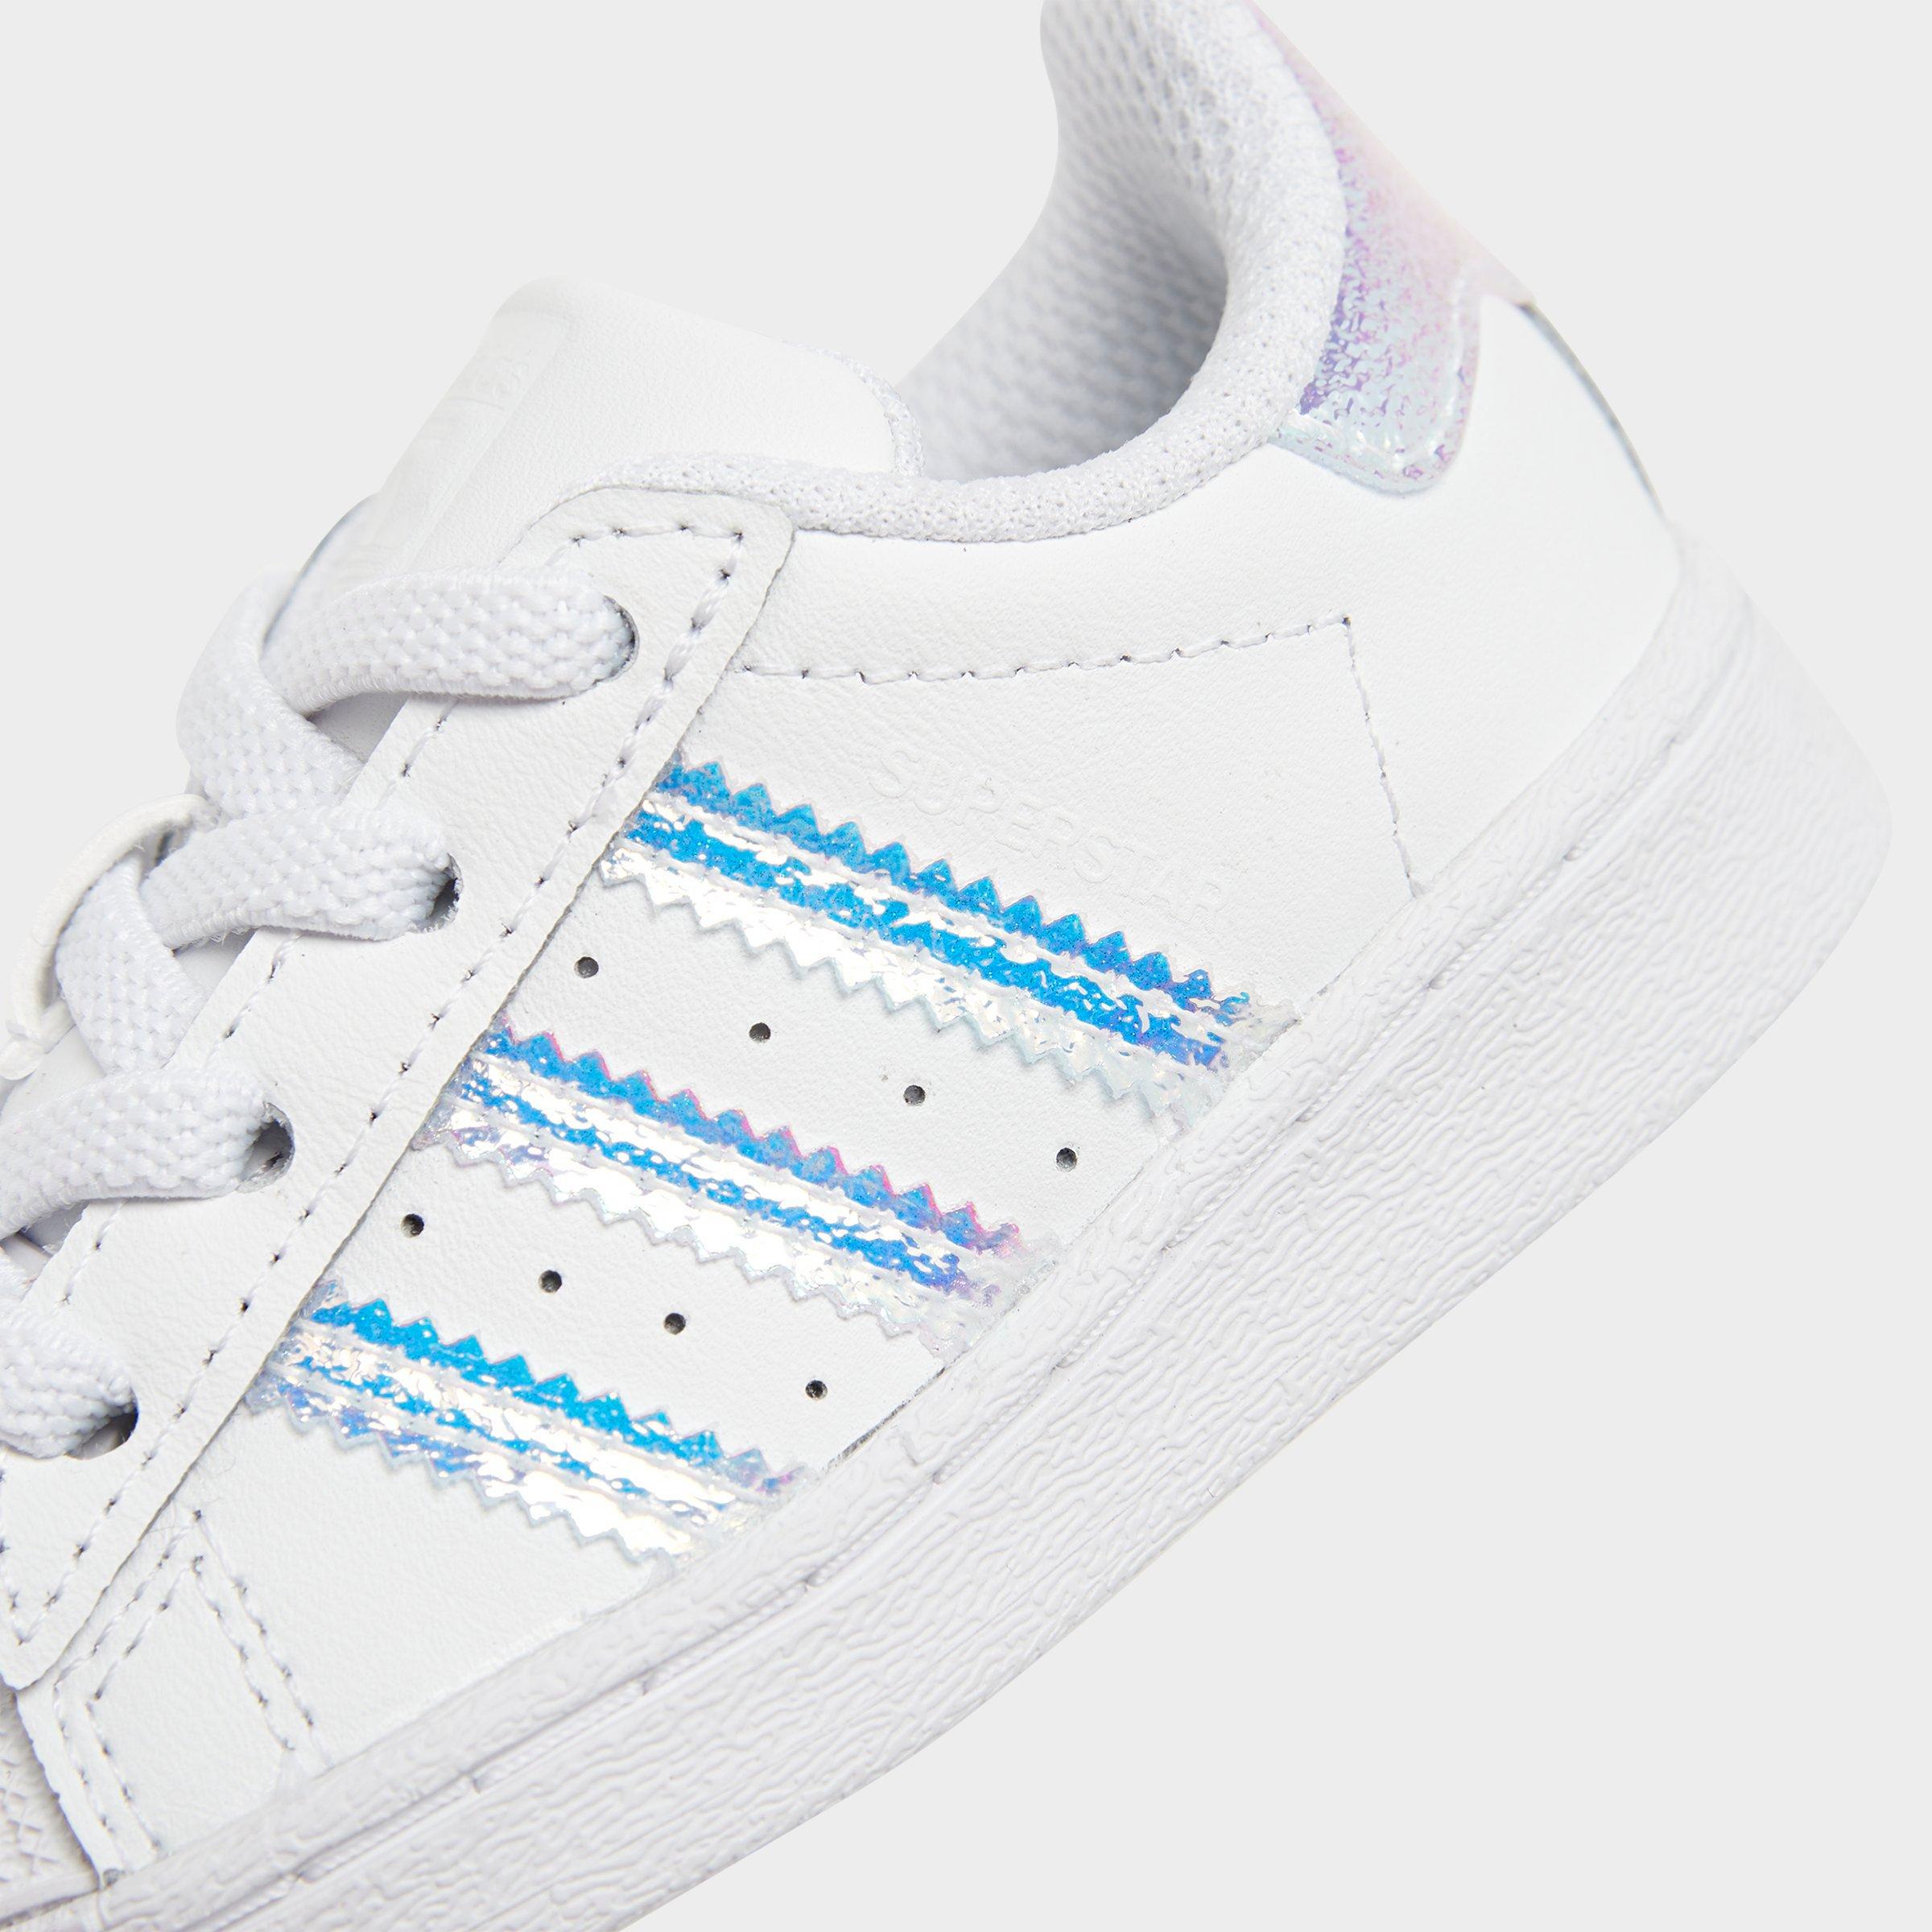 adidas superstar front view